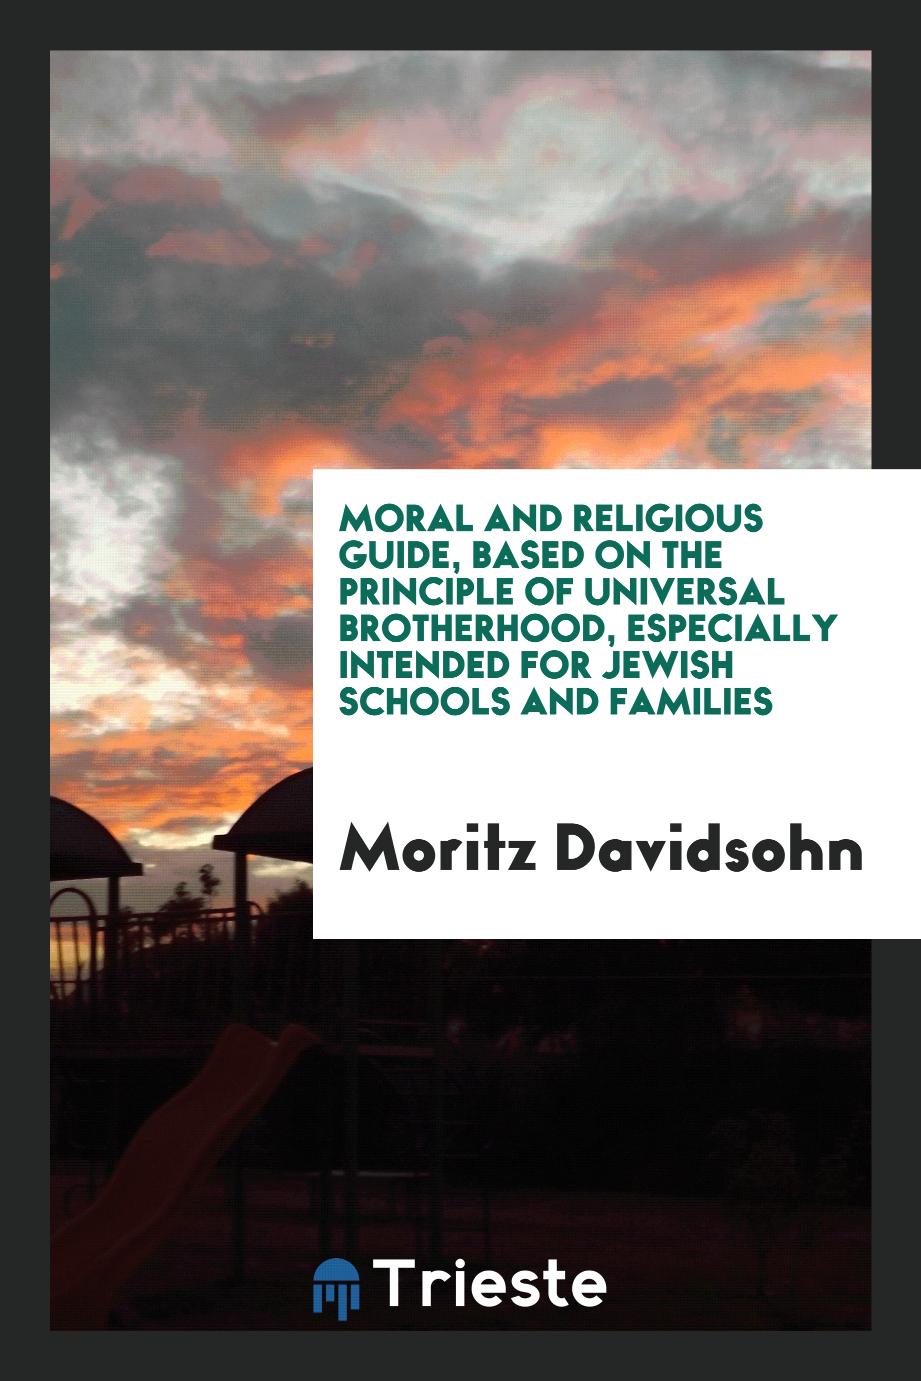 Moral and religious guide, based on the principle of universal brotherhood, especially intended for Jewish schools and families